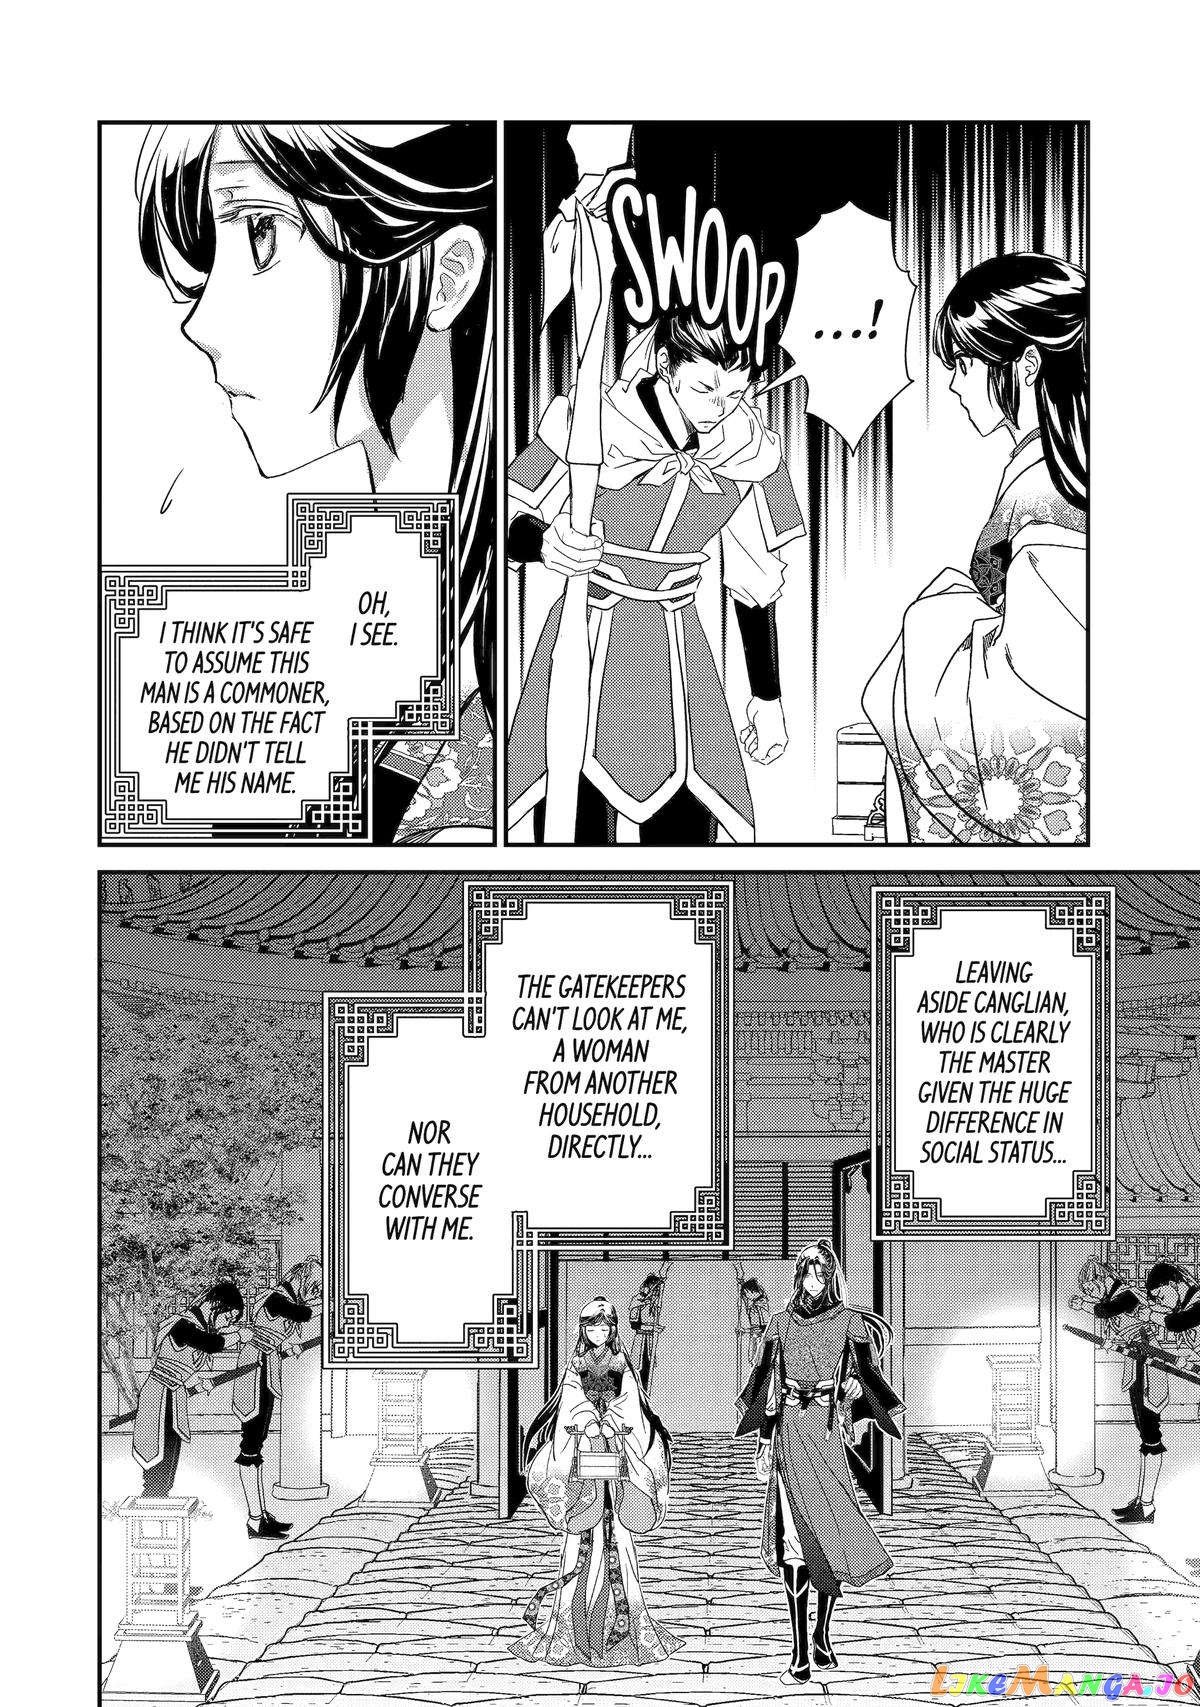 The Emperor's Caretaker: I'm Too Happy Living as a Lady-in-Waiting to Leave the Palace chapter 12 - page 18